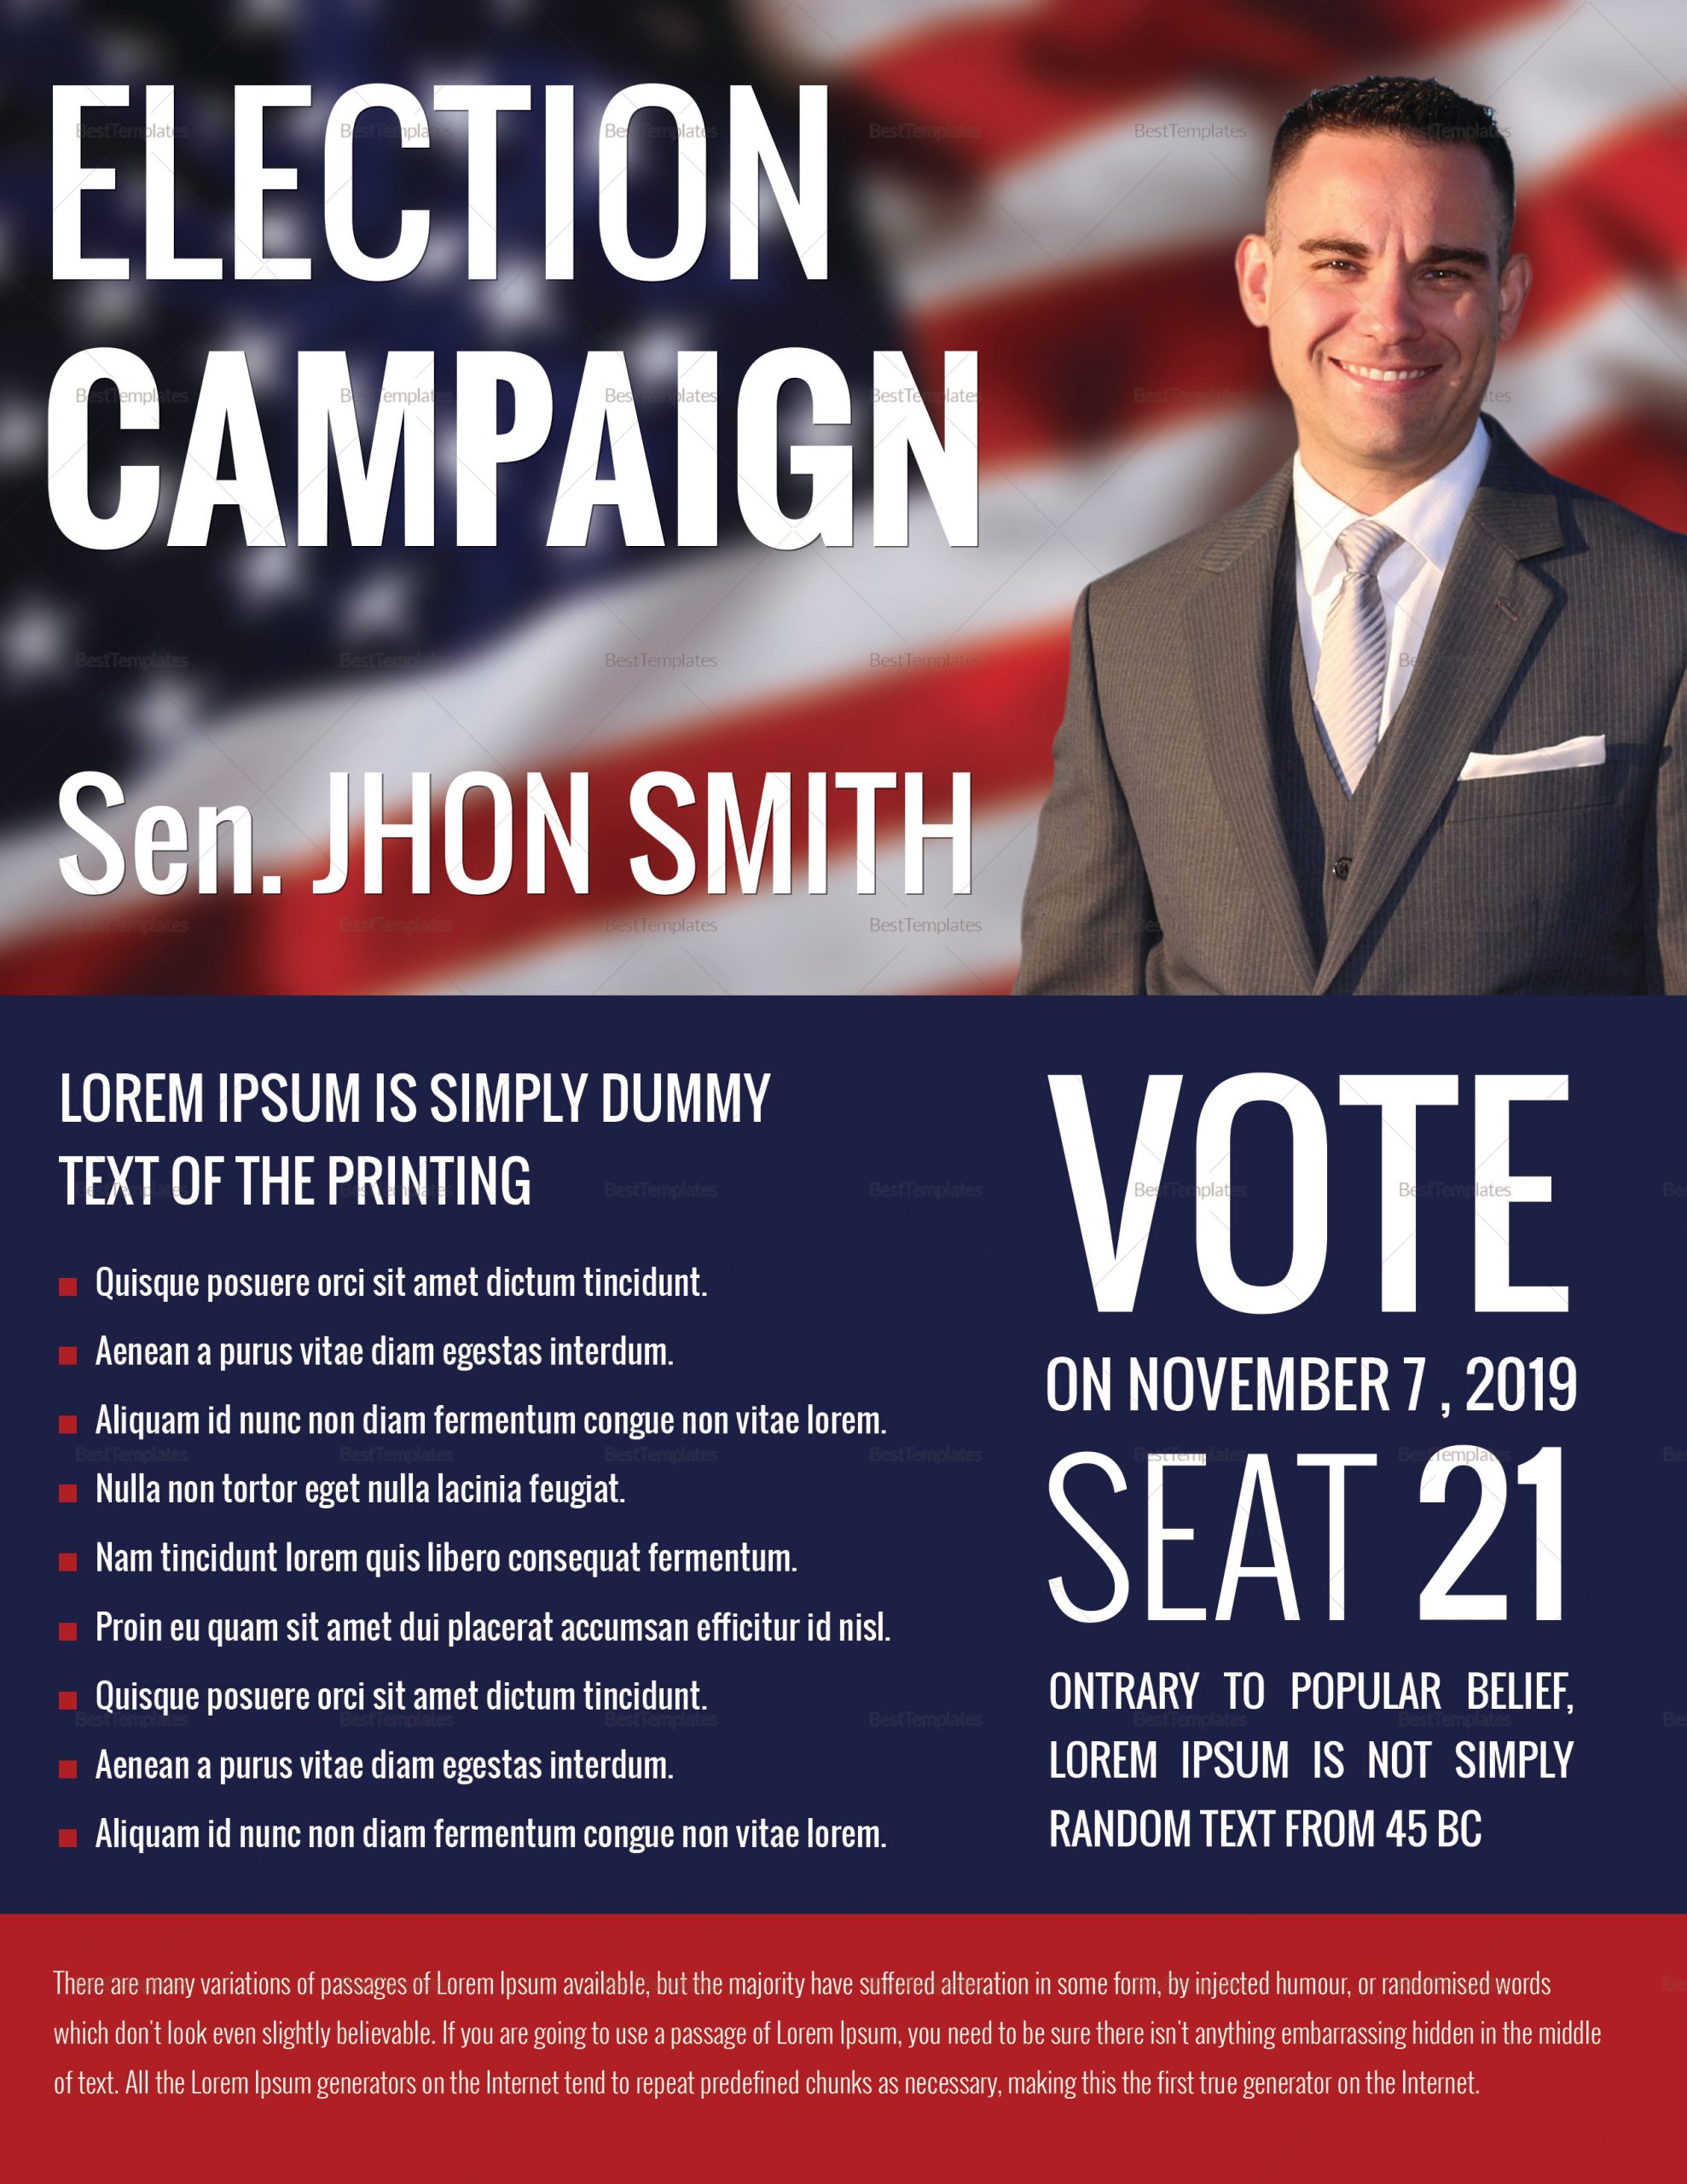 campaign poster template psd, campaign poster template publisher, campaign poster photoshop template, election poster template psd free download, campaign poster design psd, election flyer template free, blank campaign poster, campaign poster template for kids, political campaign poster example